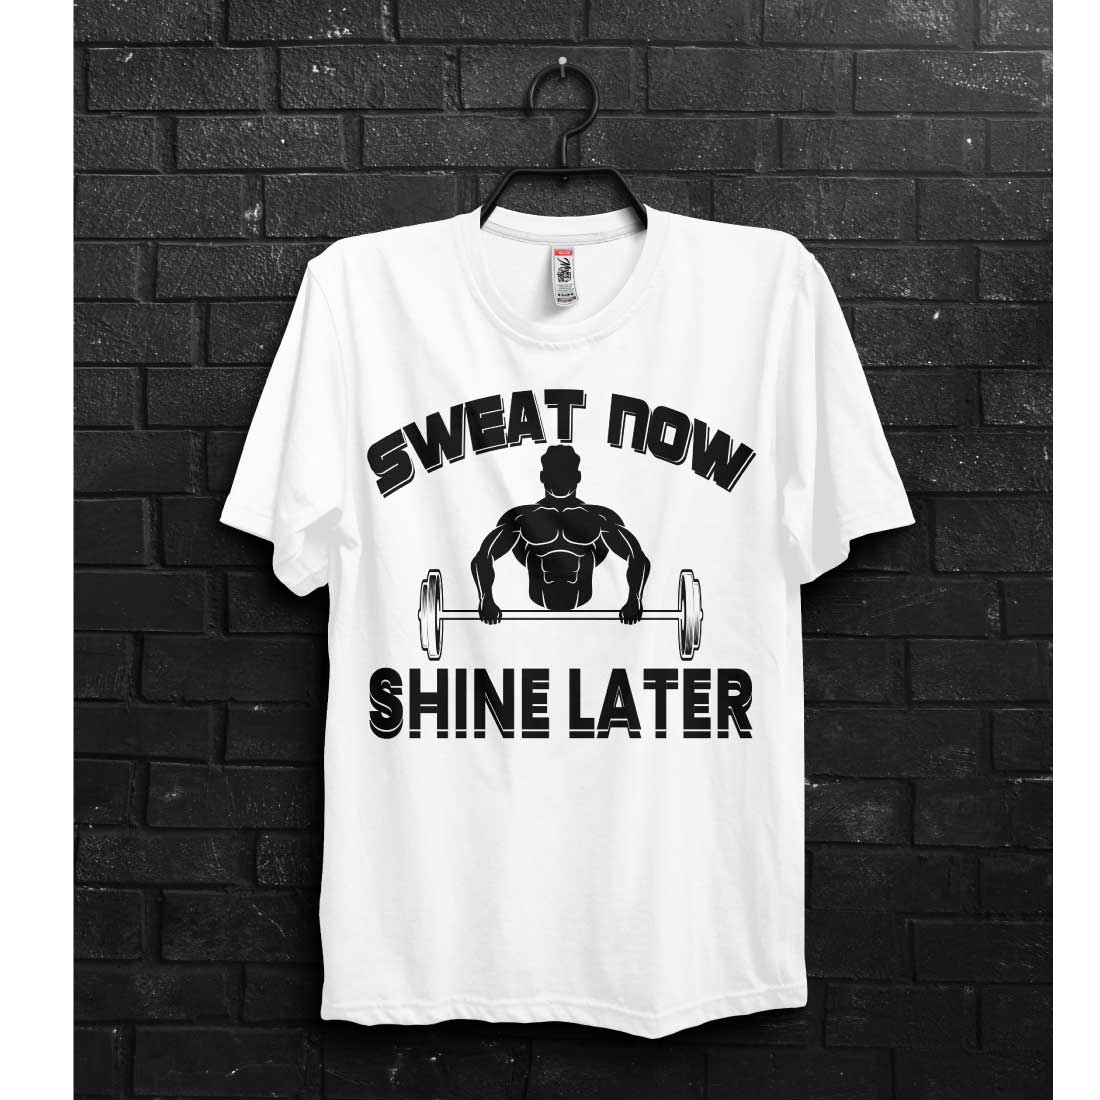 White shirt that says sweat now shine later.